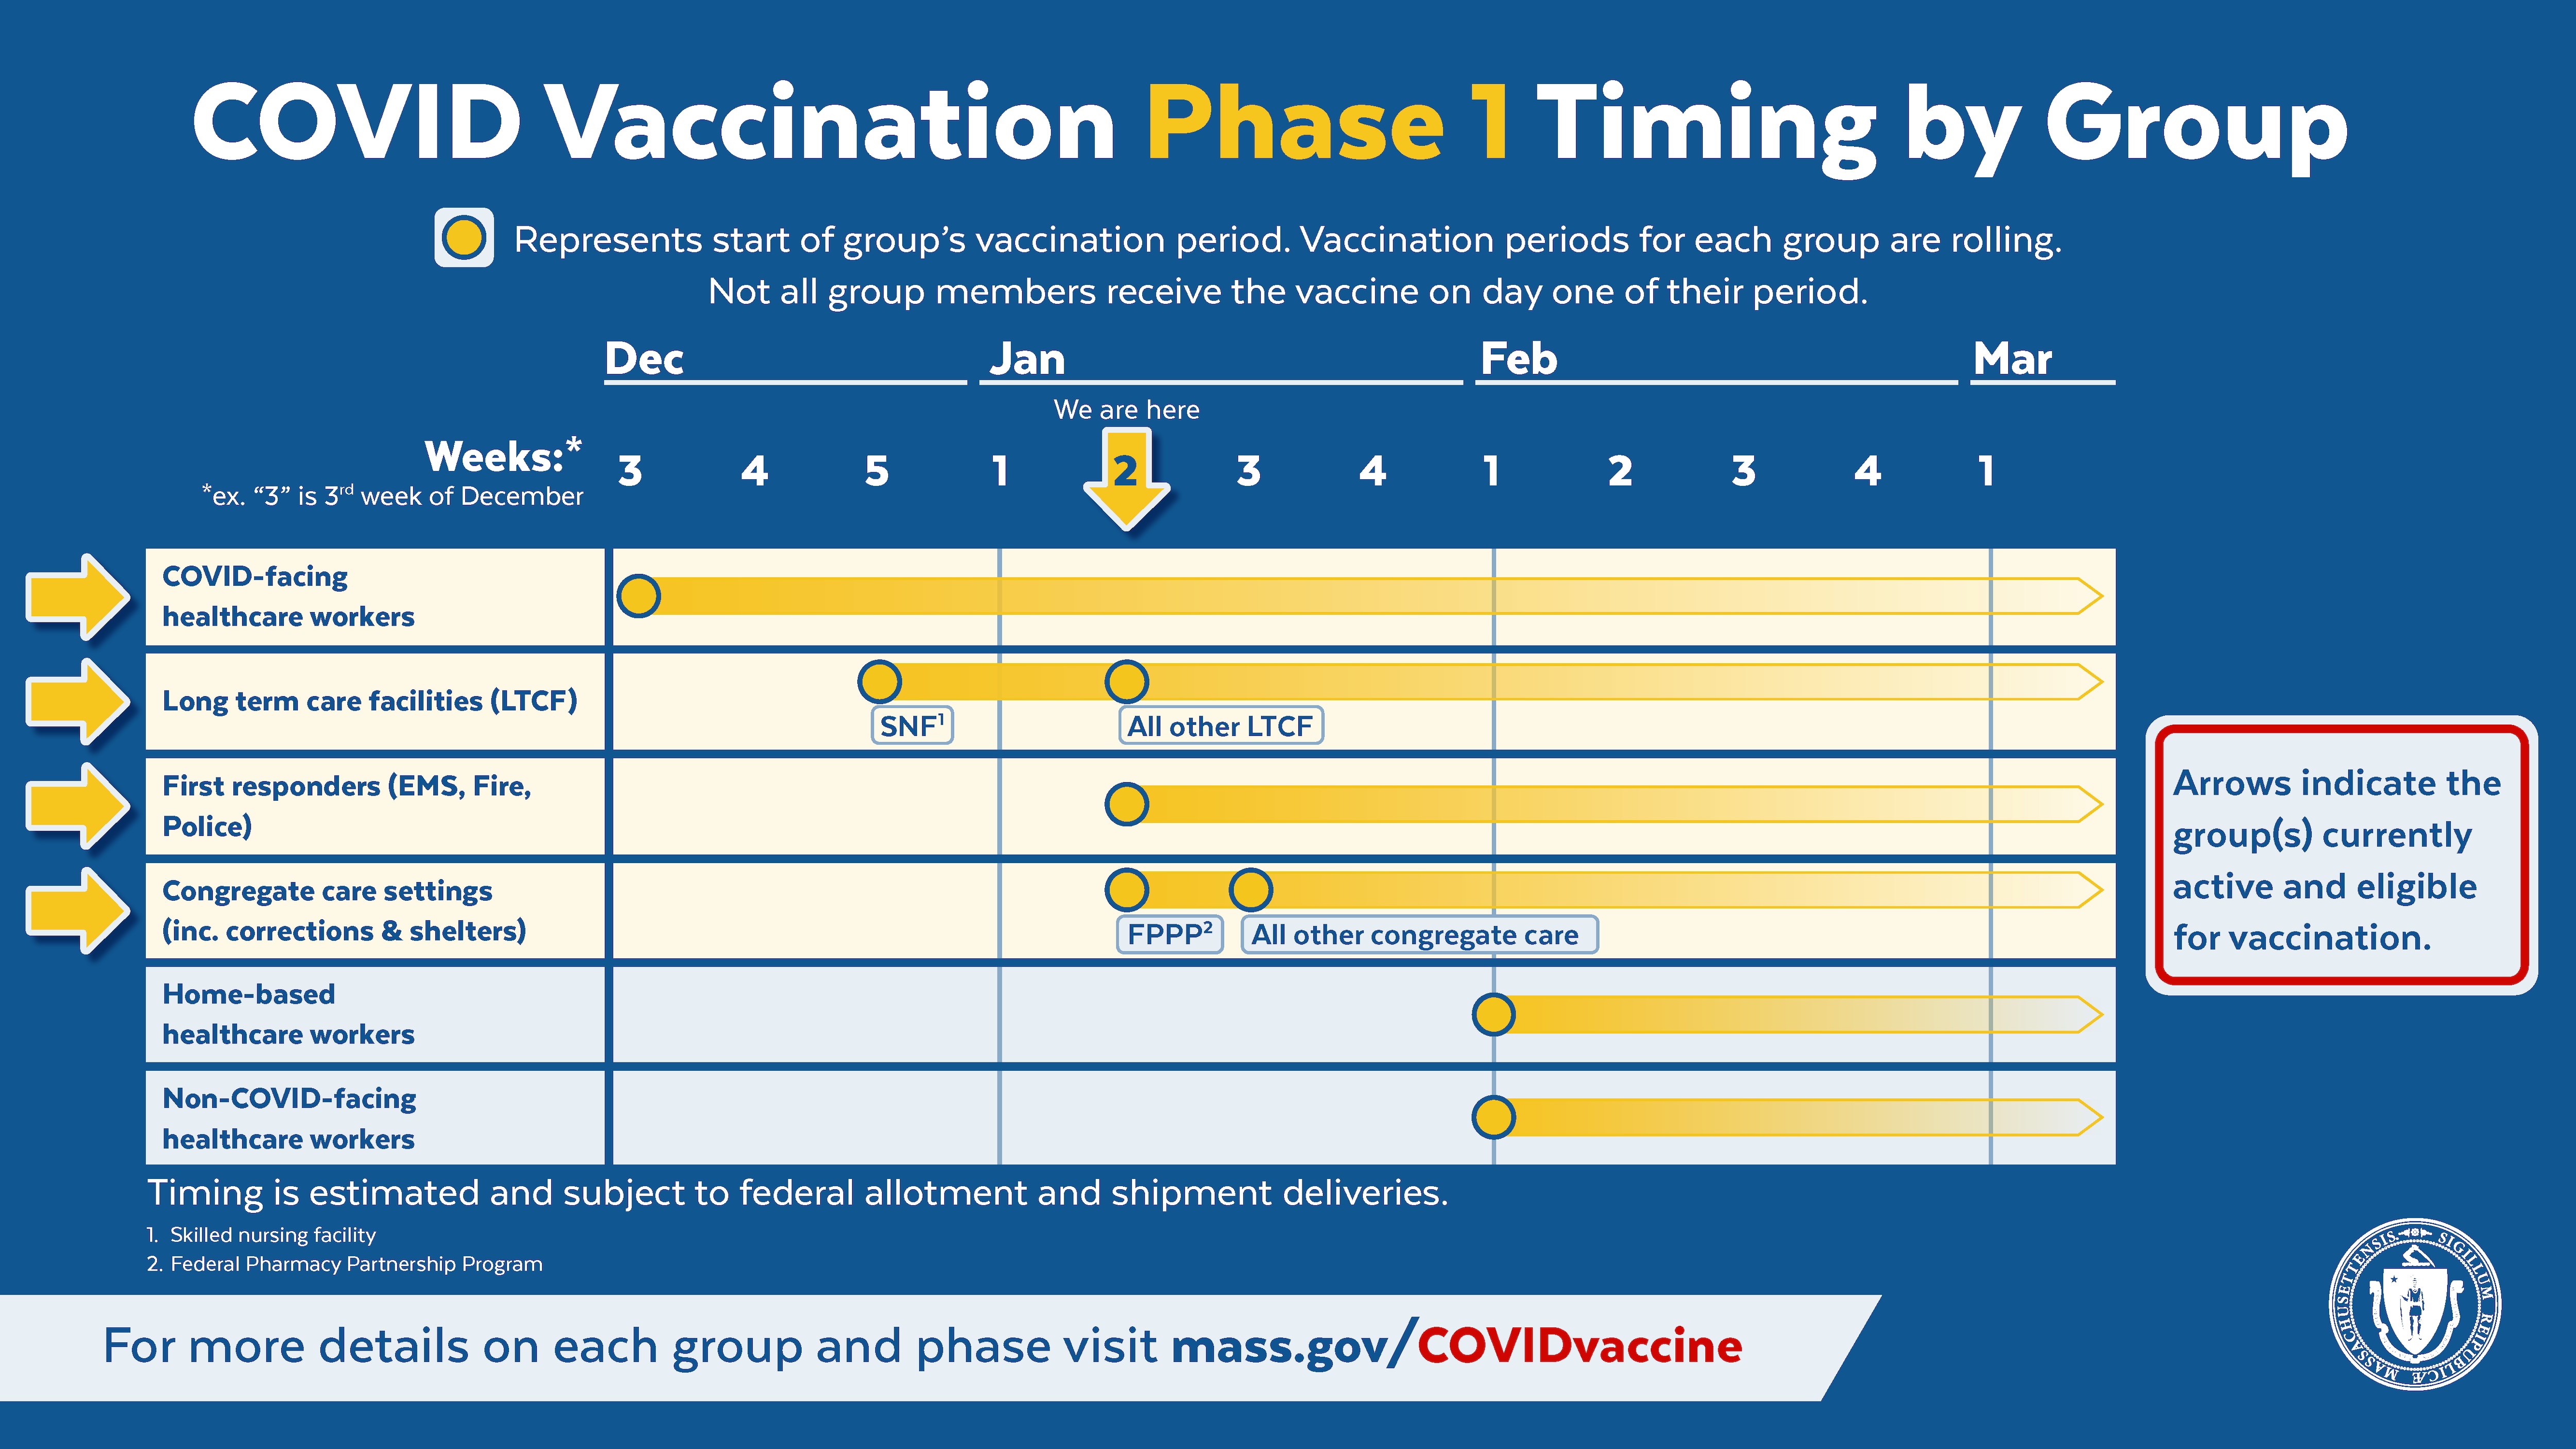 Graphic showing COVID Vaccination Phase 1 Timing by Priority Group: As of the 2nd week of January: COVID-facing health care workers, all long-term care facilities, first responders and congregate care are underway